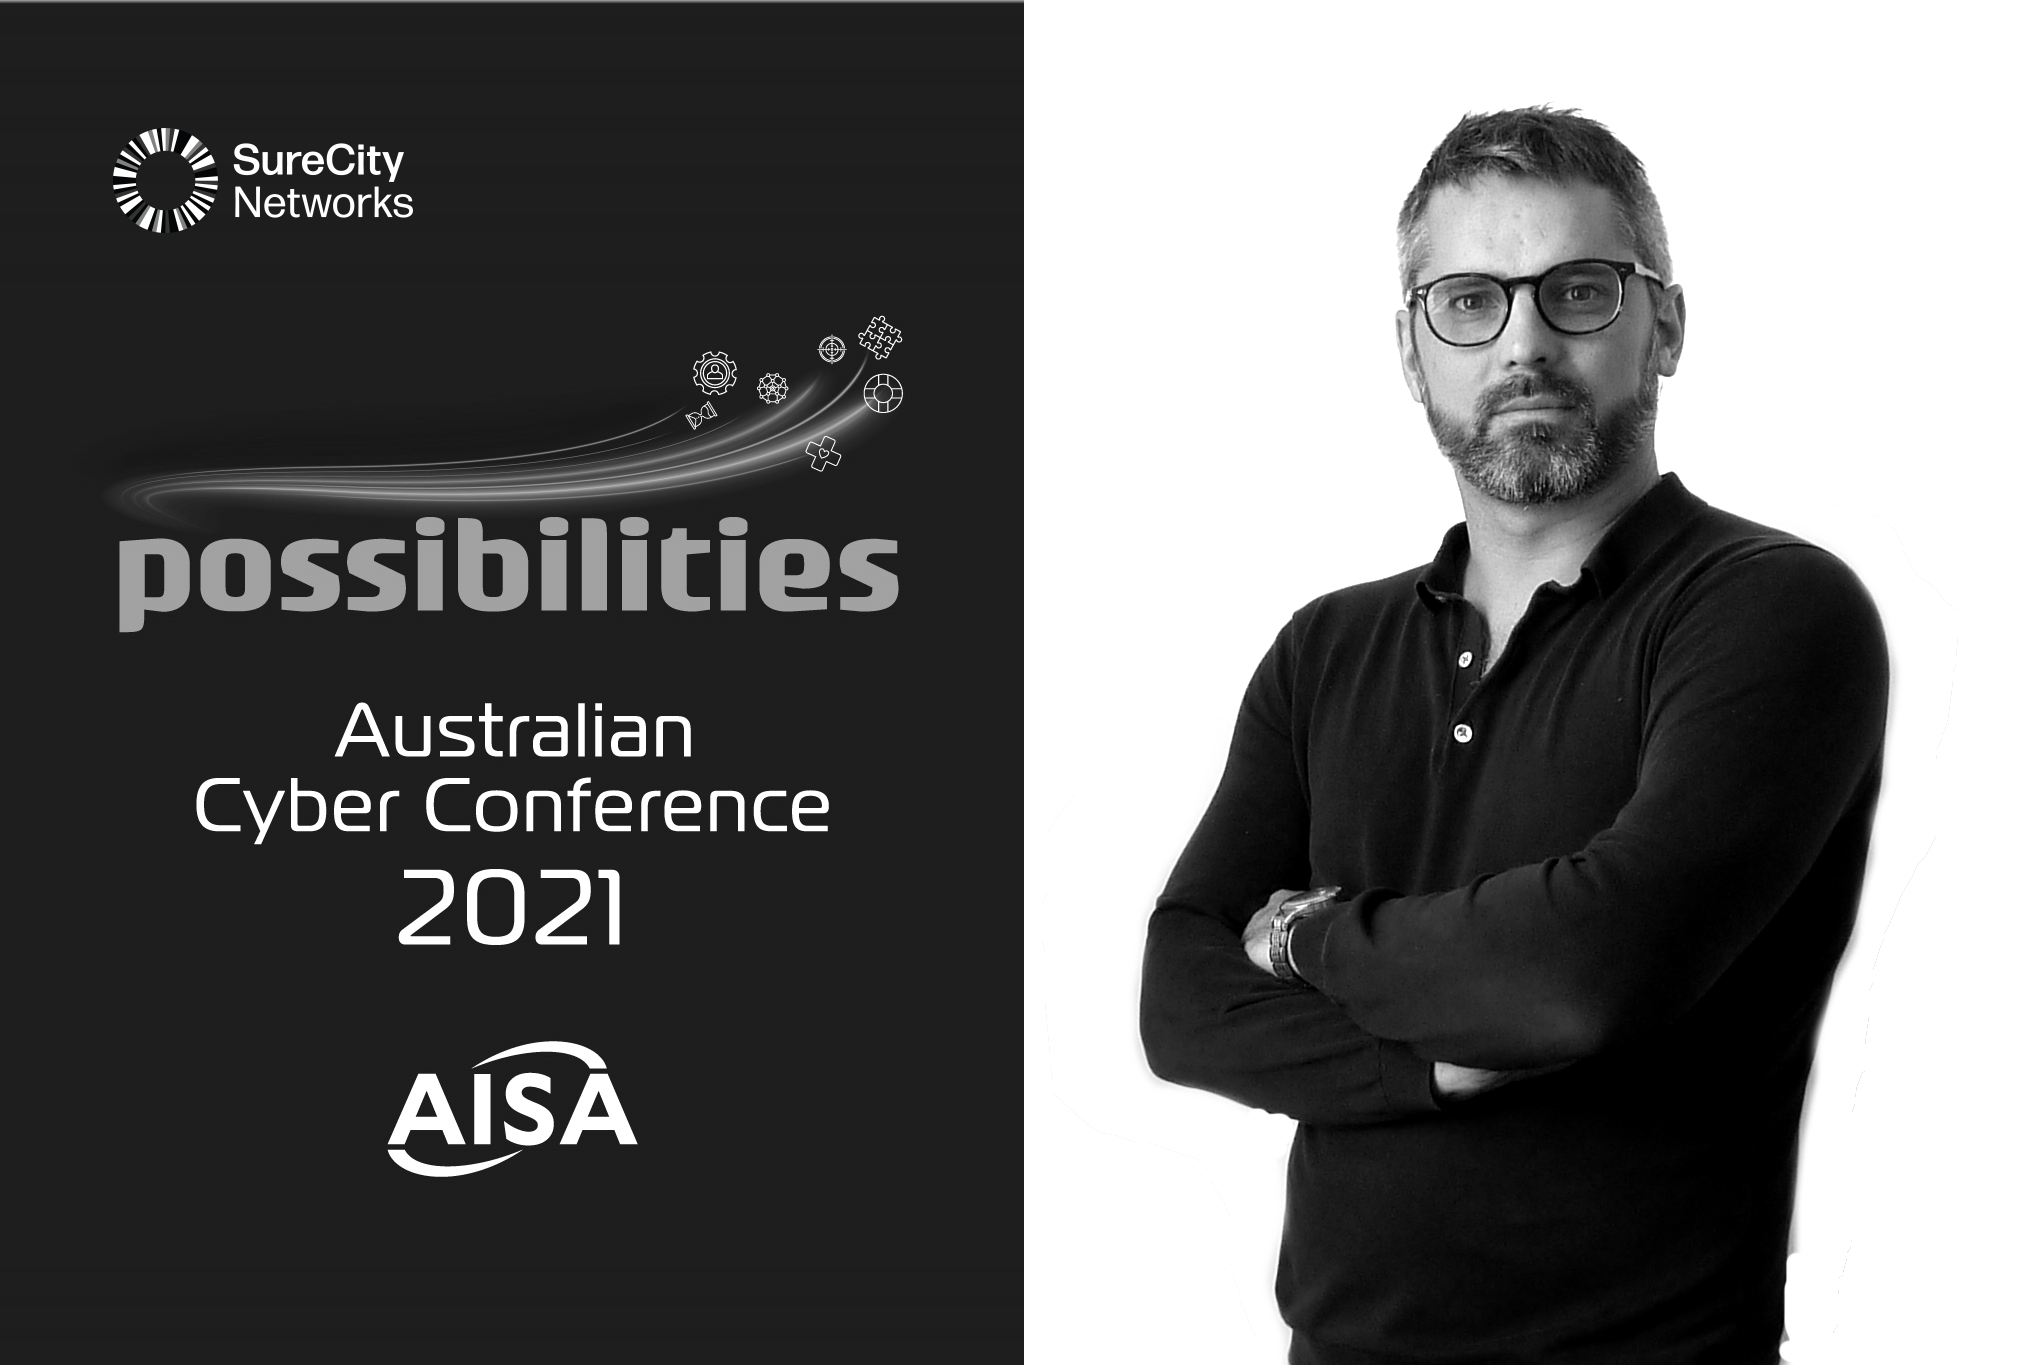 Come and see SureCity Networks at the Australian Cyber Conference 16-18 March 2021